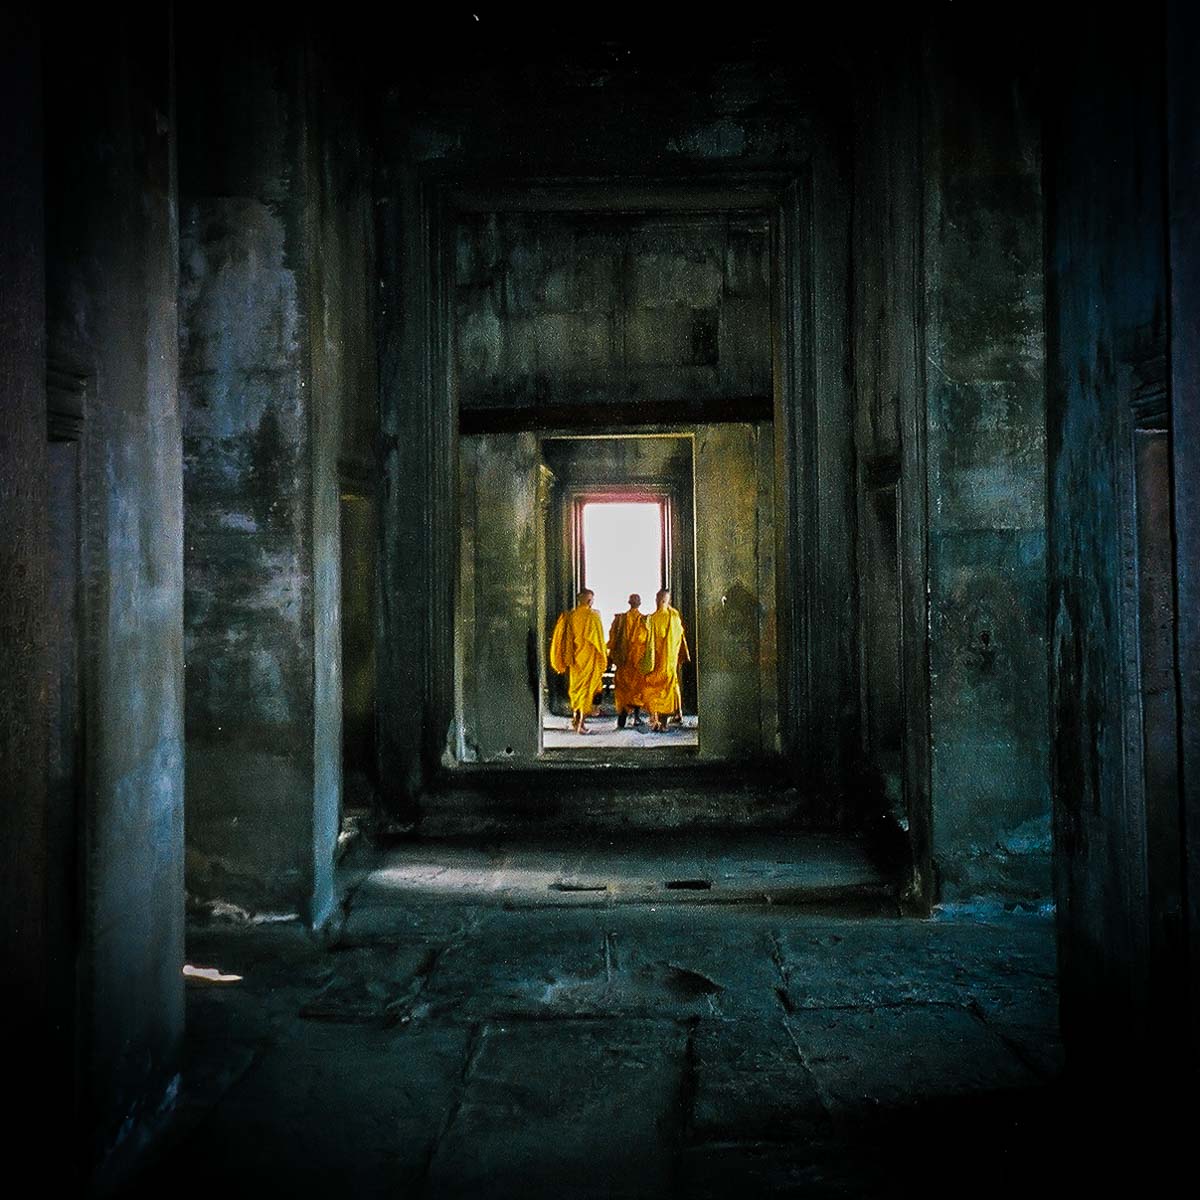 Film unknown / 35mm, Yashica Zoommate. Monks in Angkor Wat, Cambodia. January 2002.